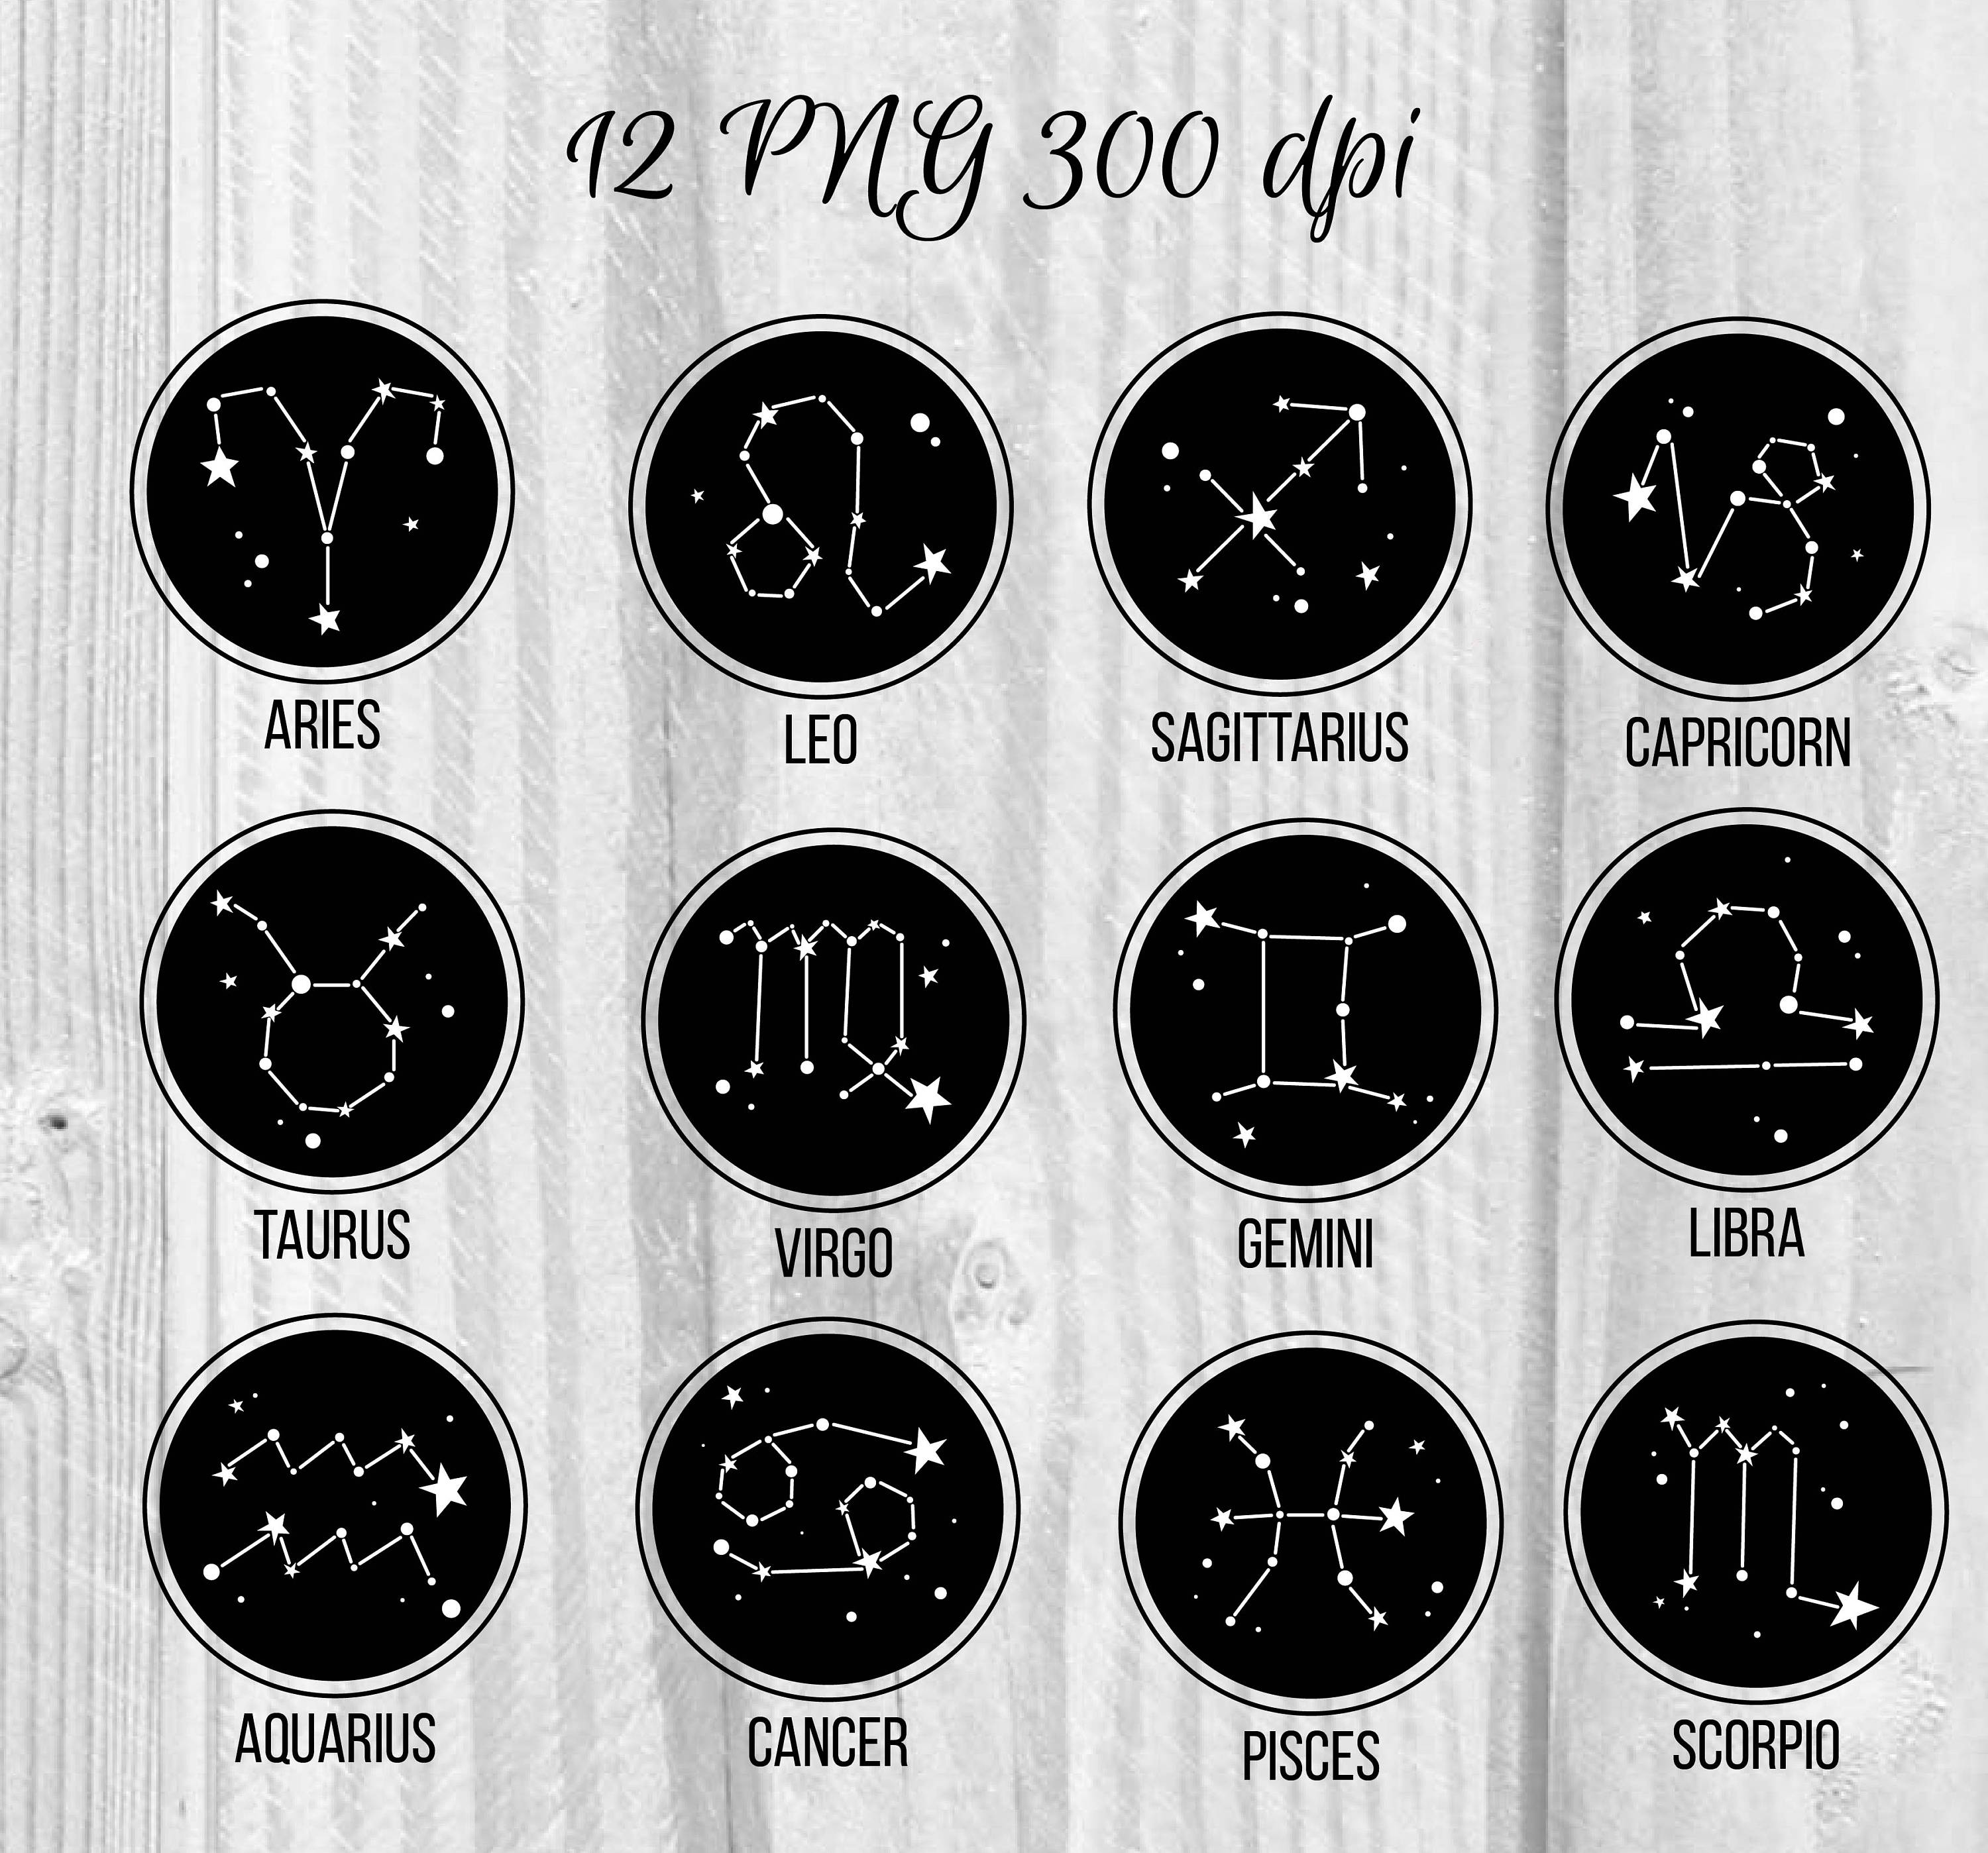 12 png zodiac constellation badges zodiac signs labels